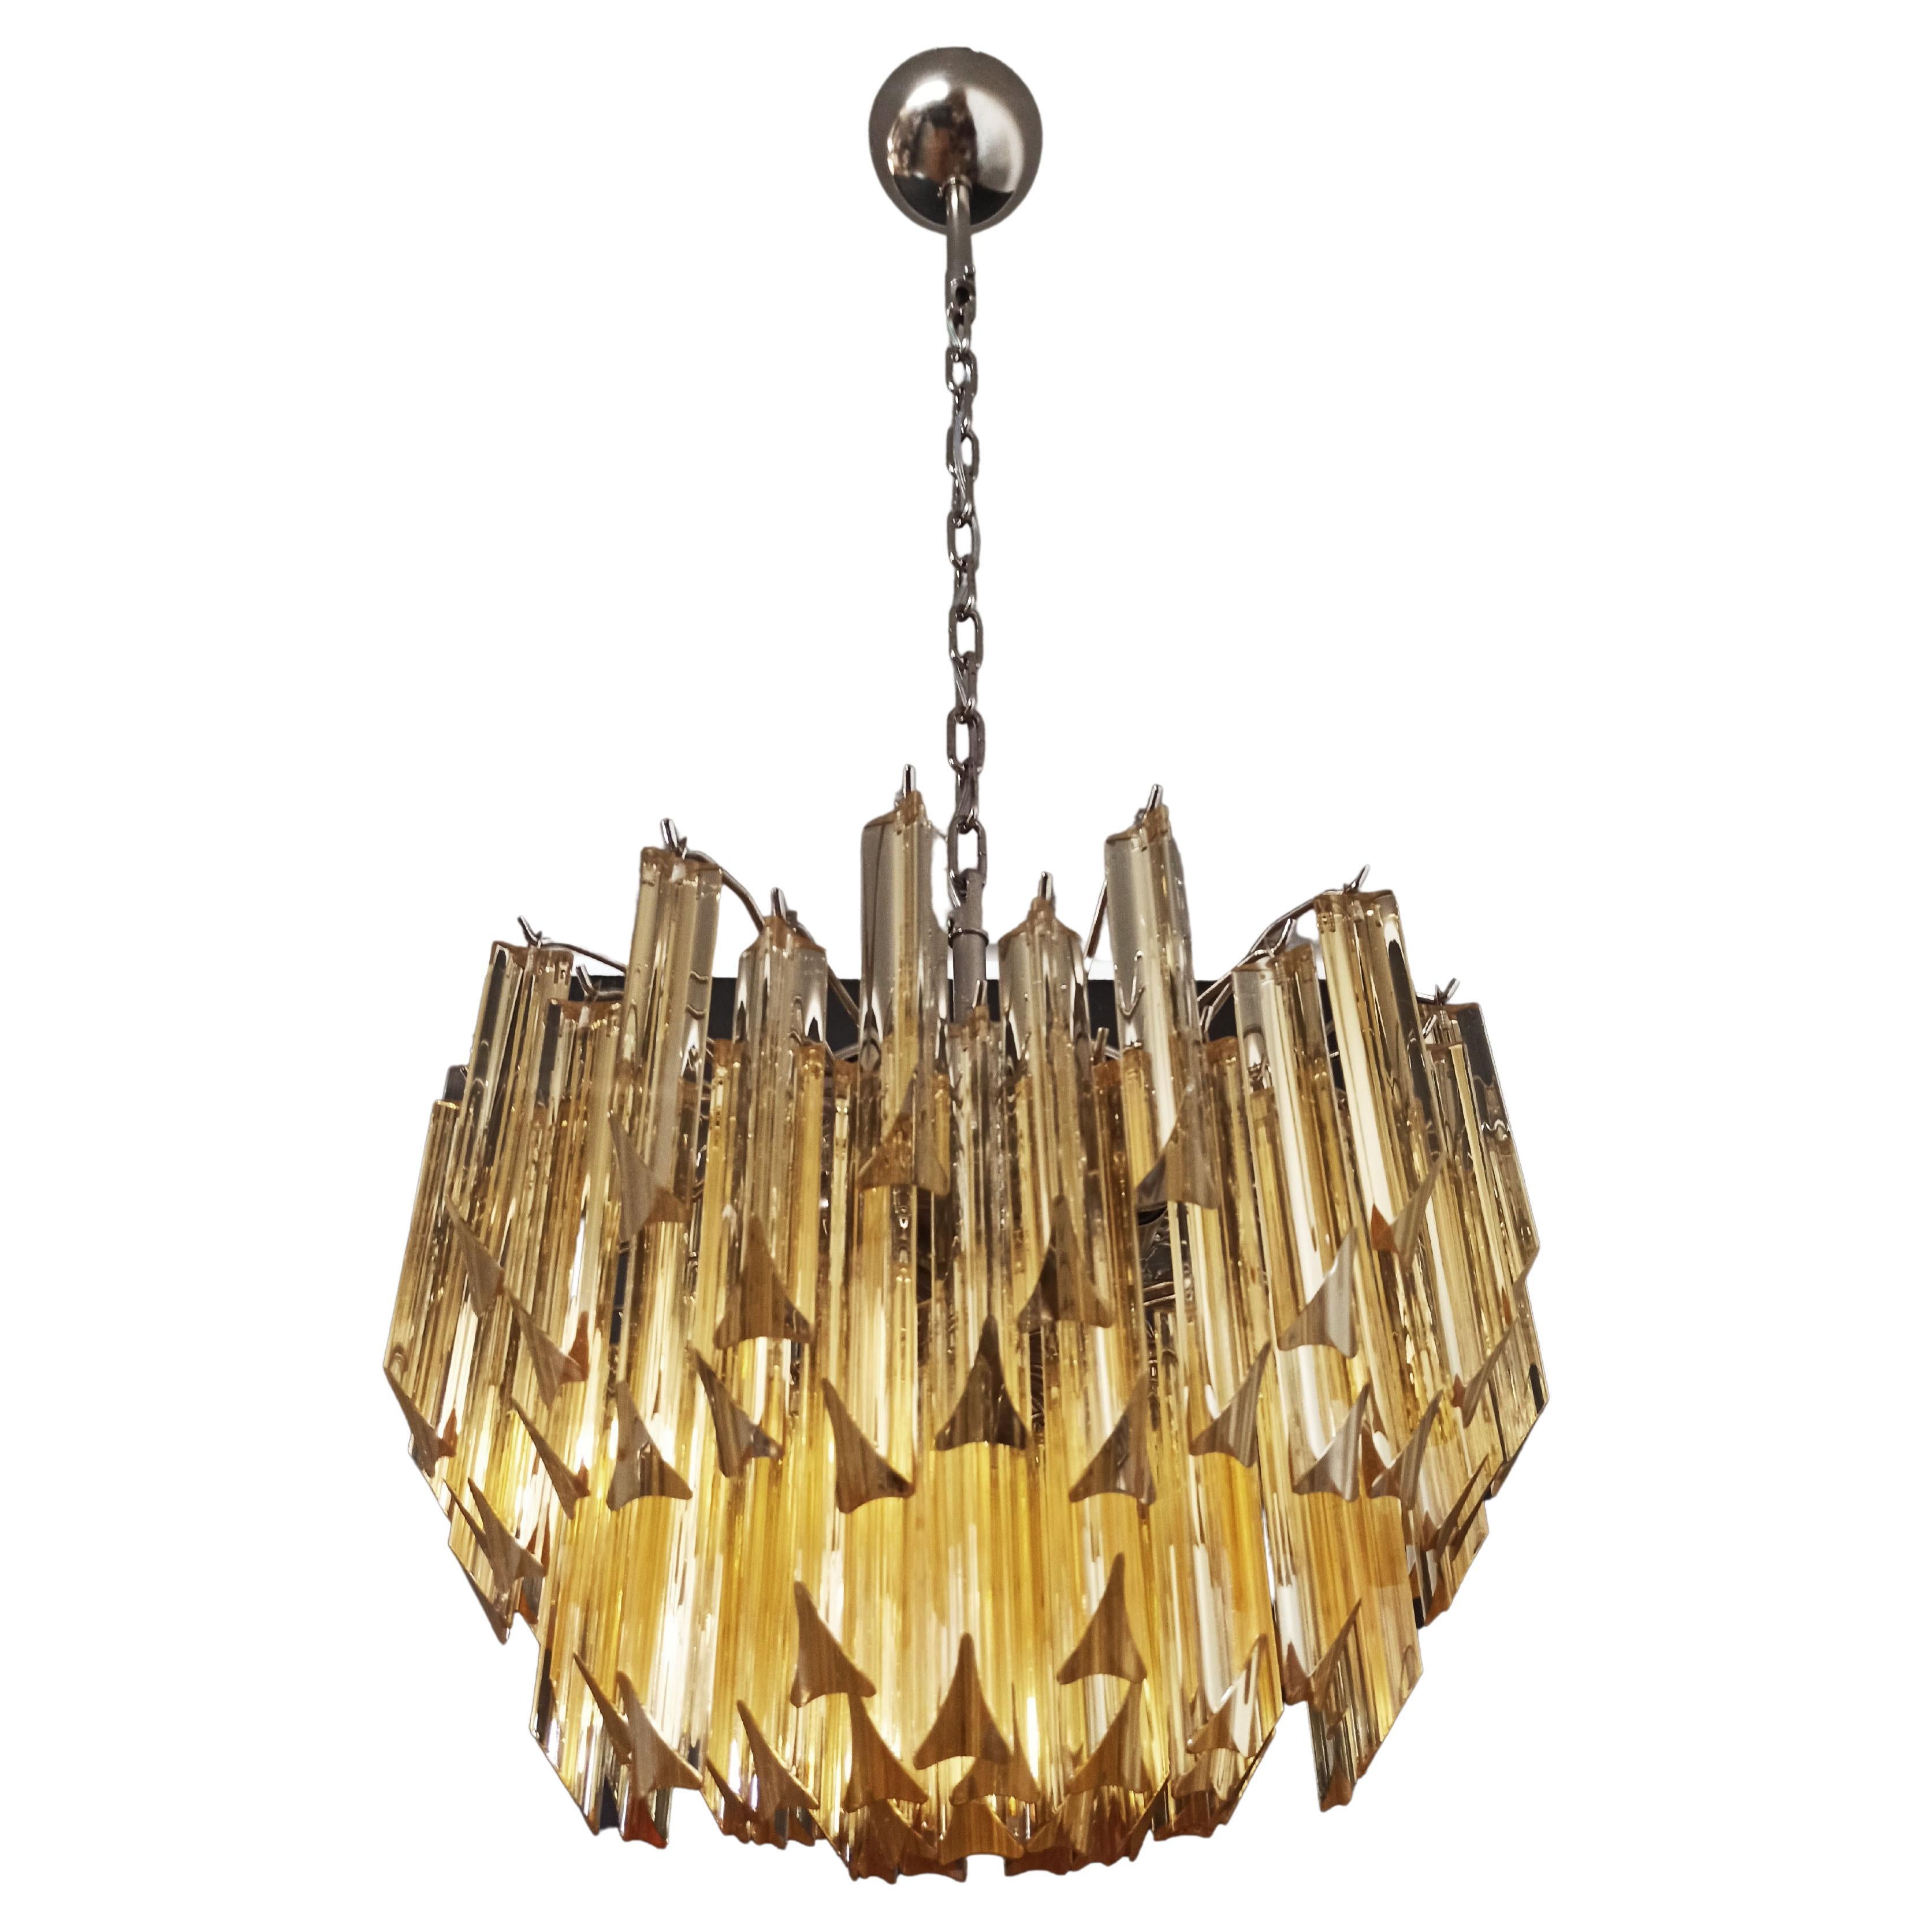 Vintage Italian Chandeliers, Murano In Excellent Condition For Sale In Budapest, HU